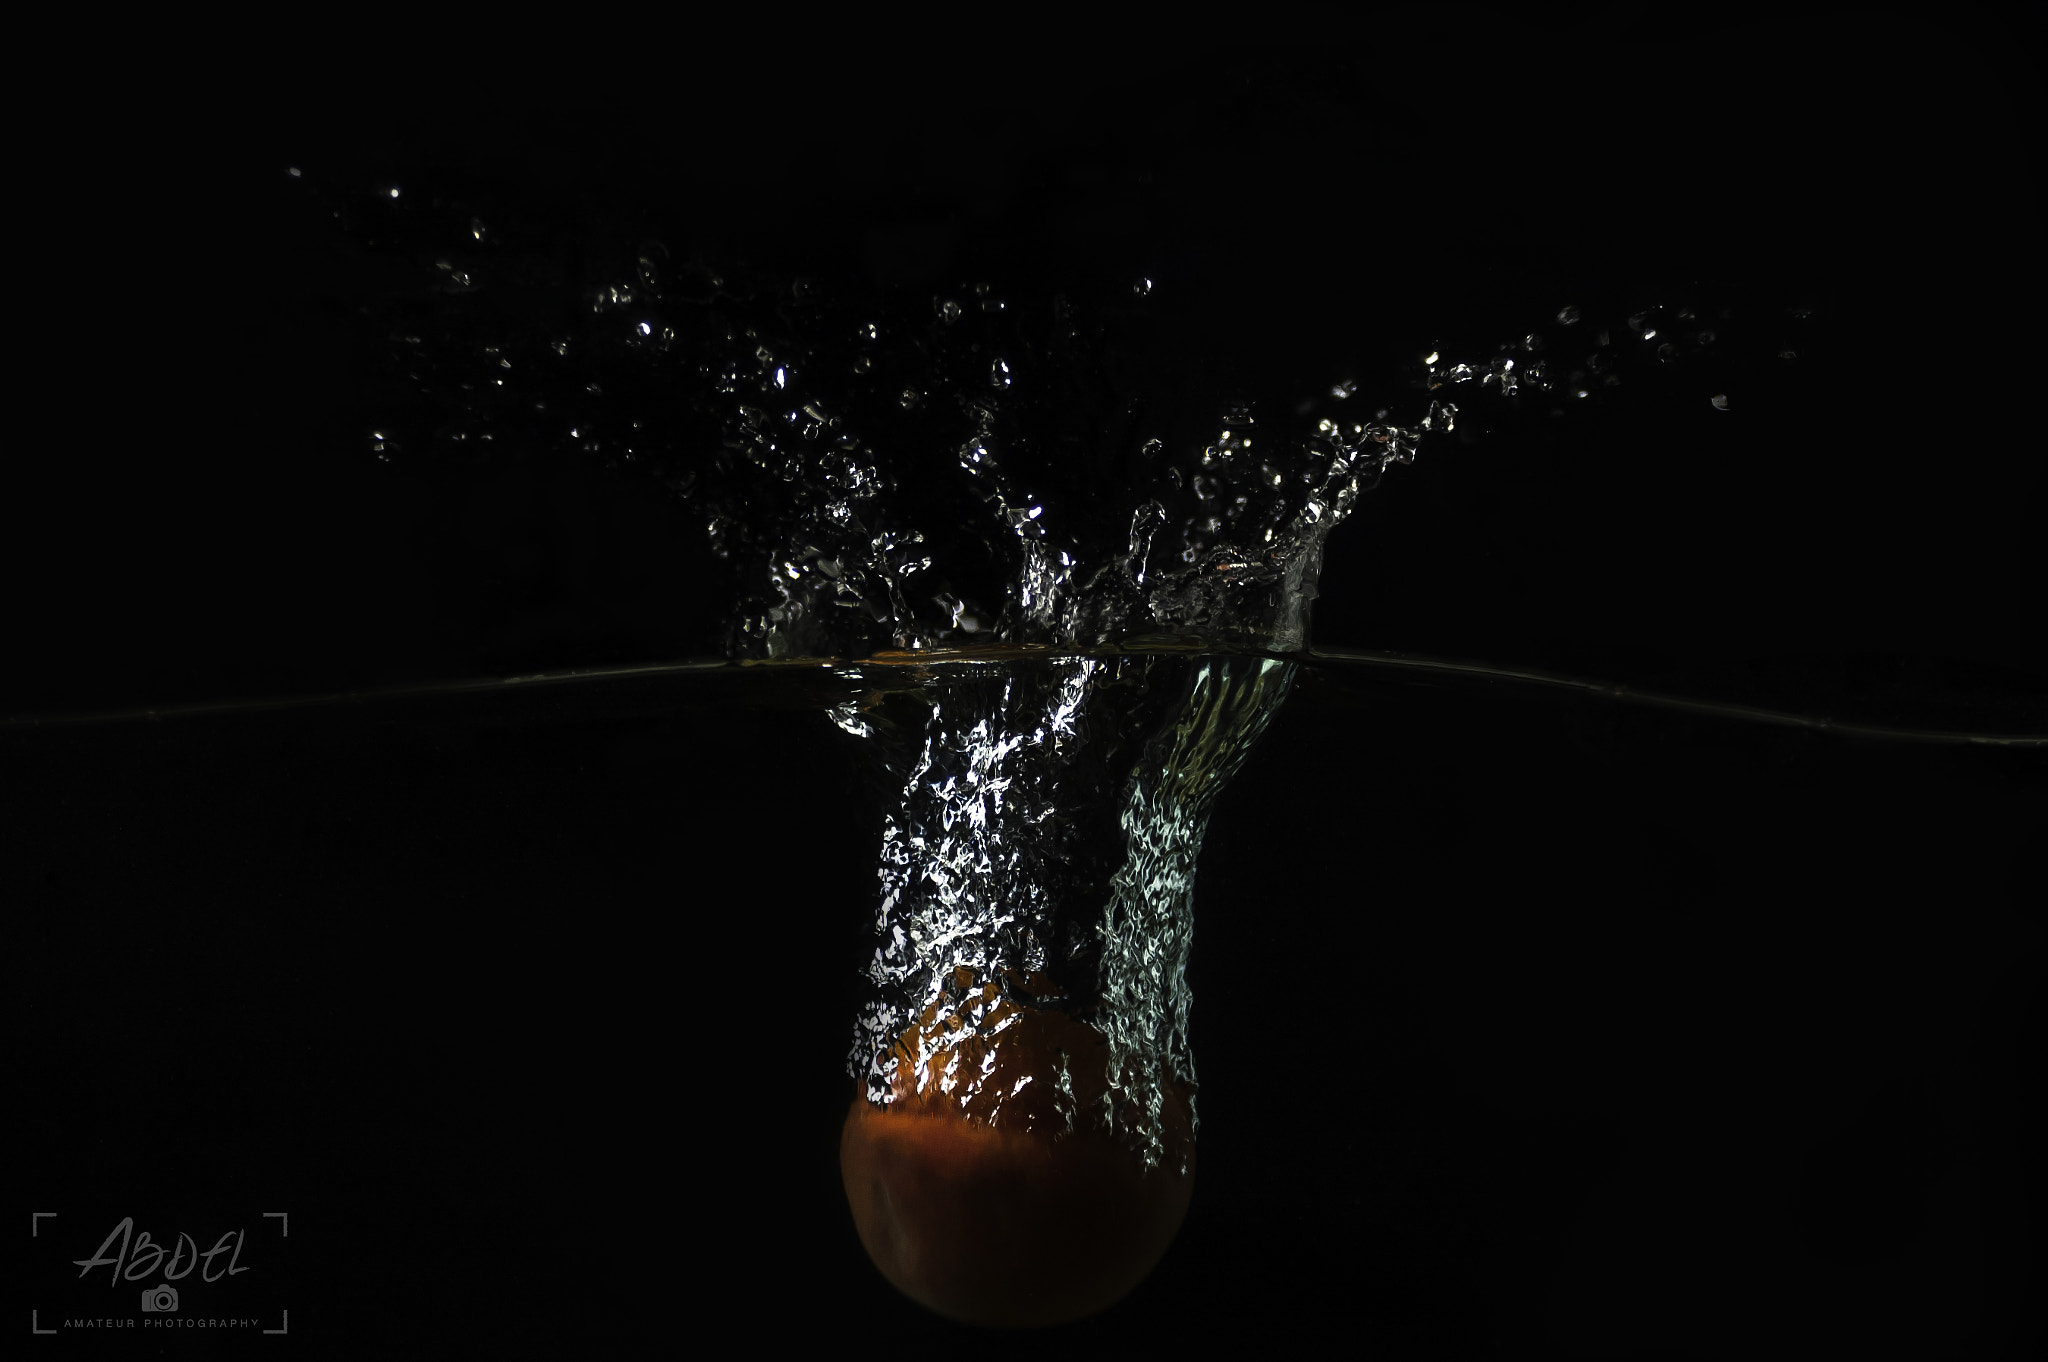 Nikon D50 sample photo. A peach floating in water photography